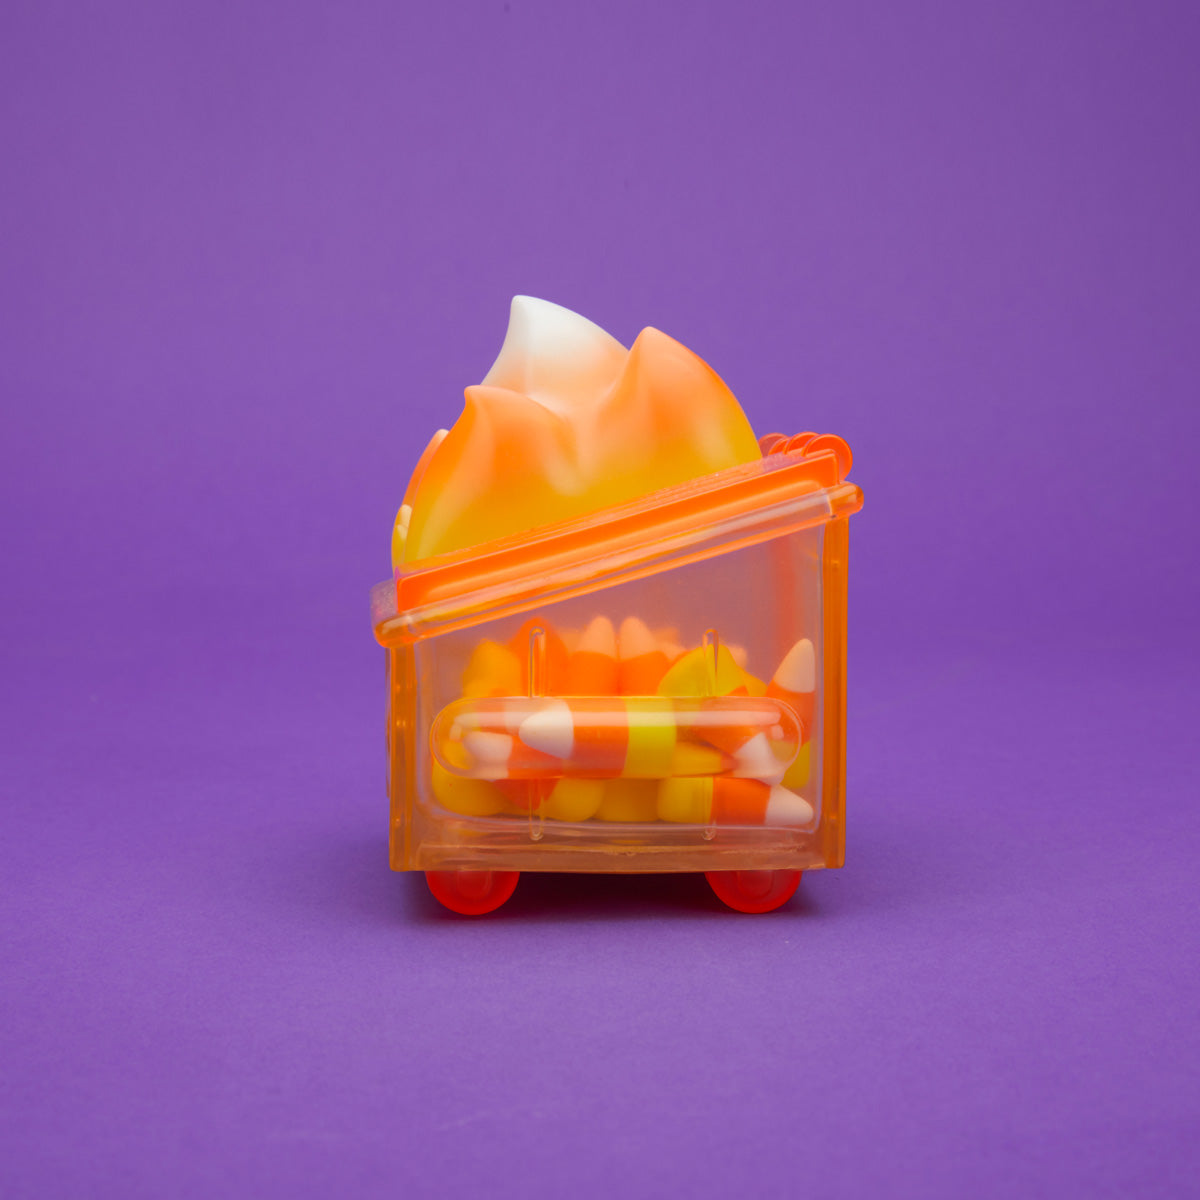 Orange translucent Dumpster Fire filled with candy corn and a yellow, orange, and white flame from the side.